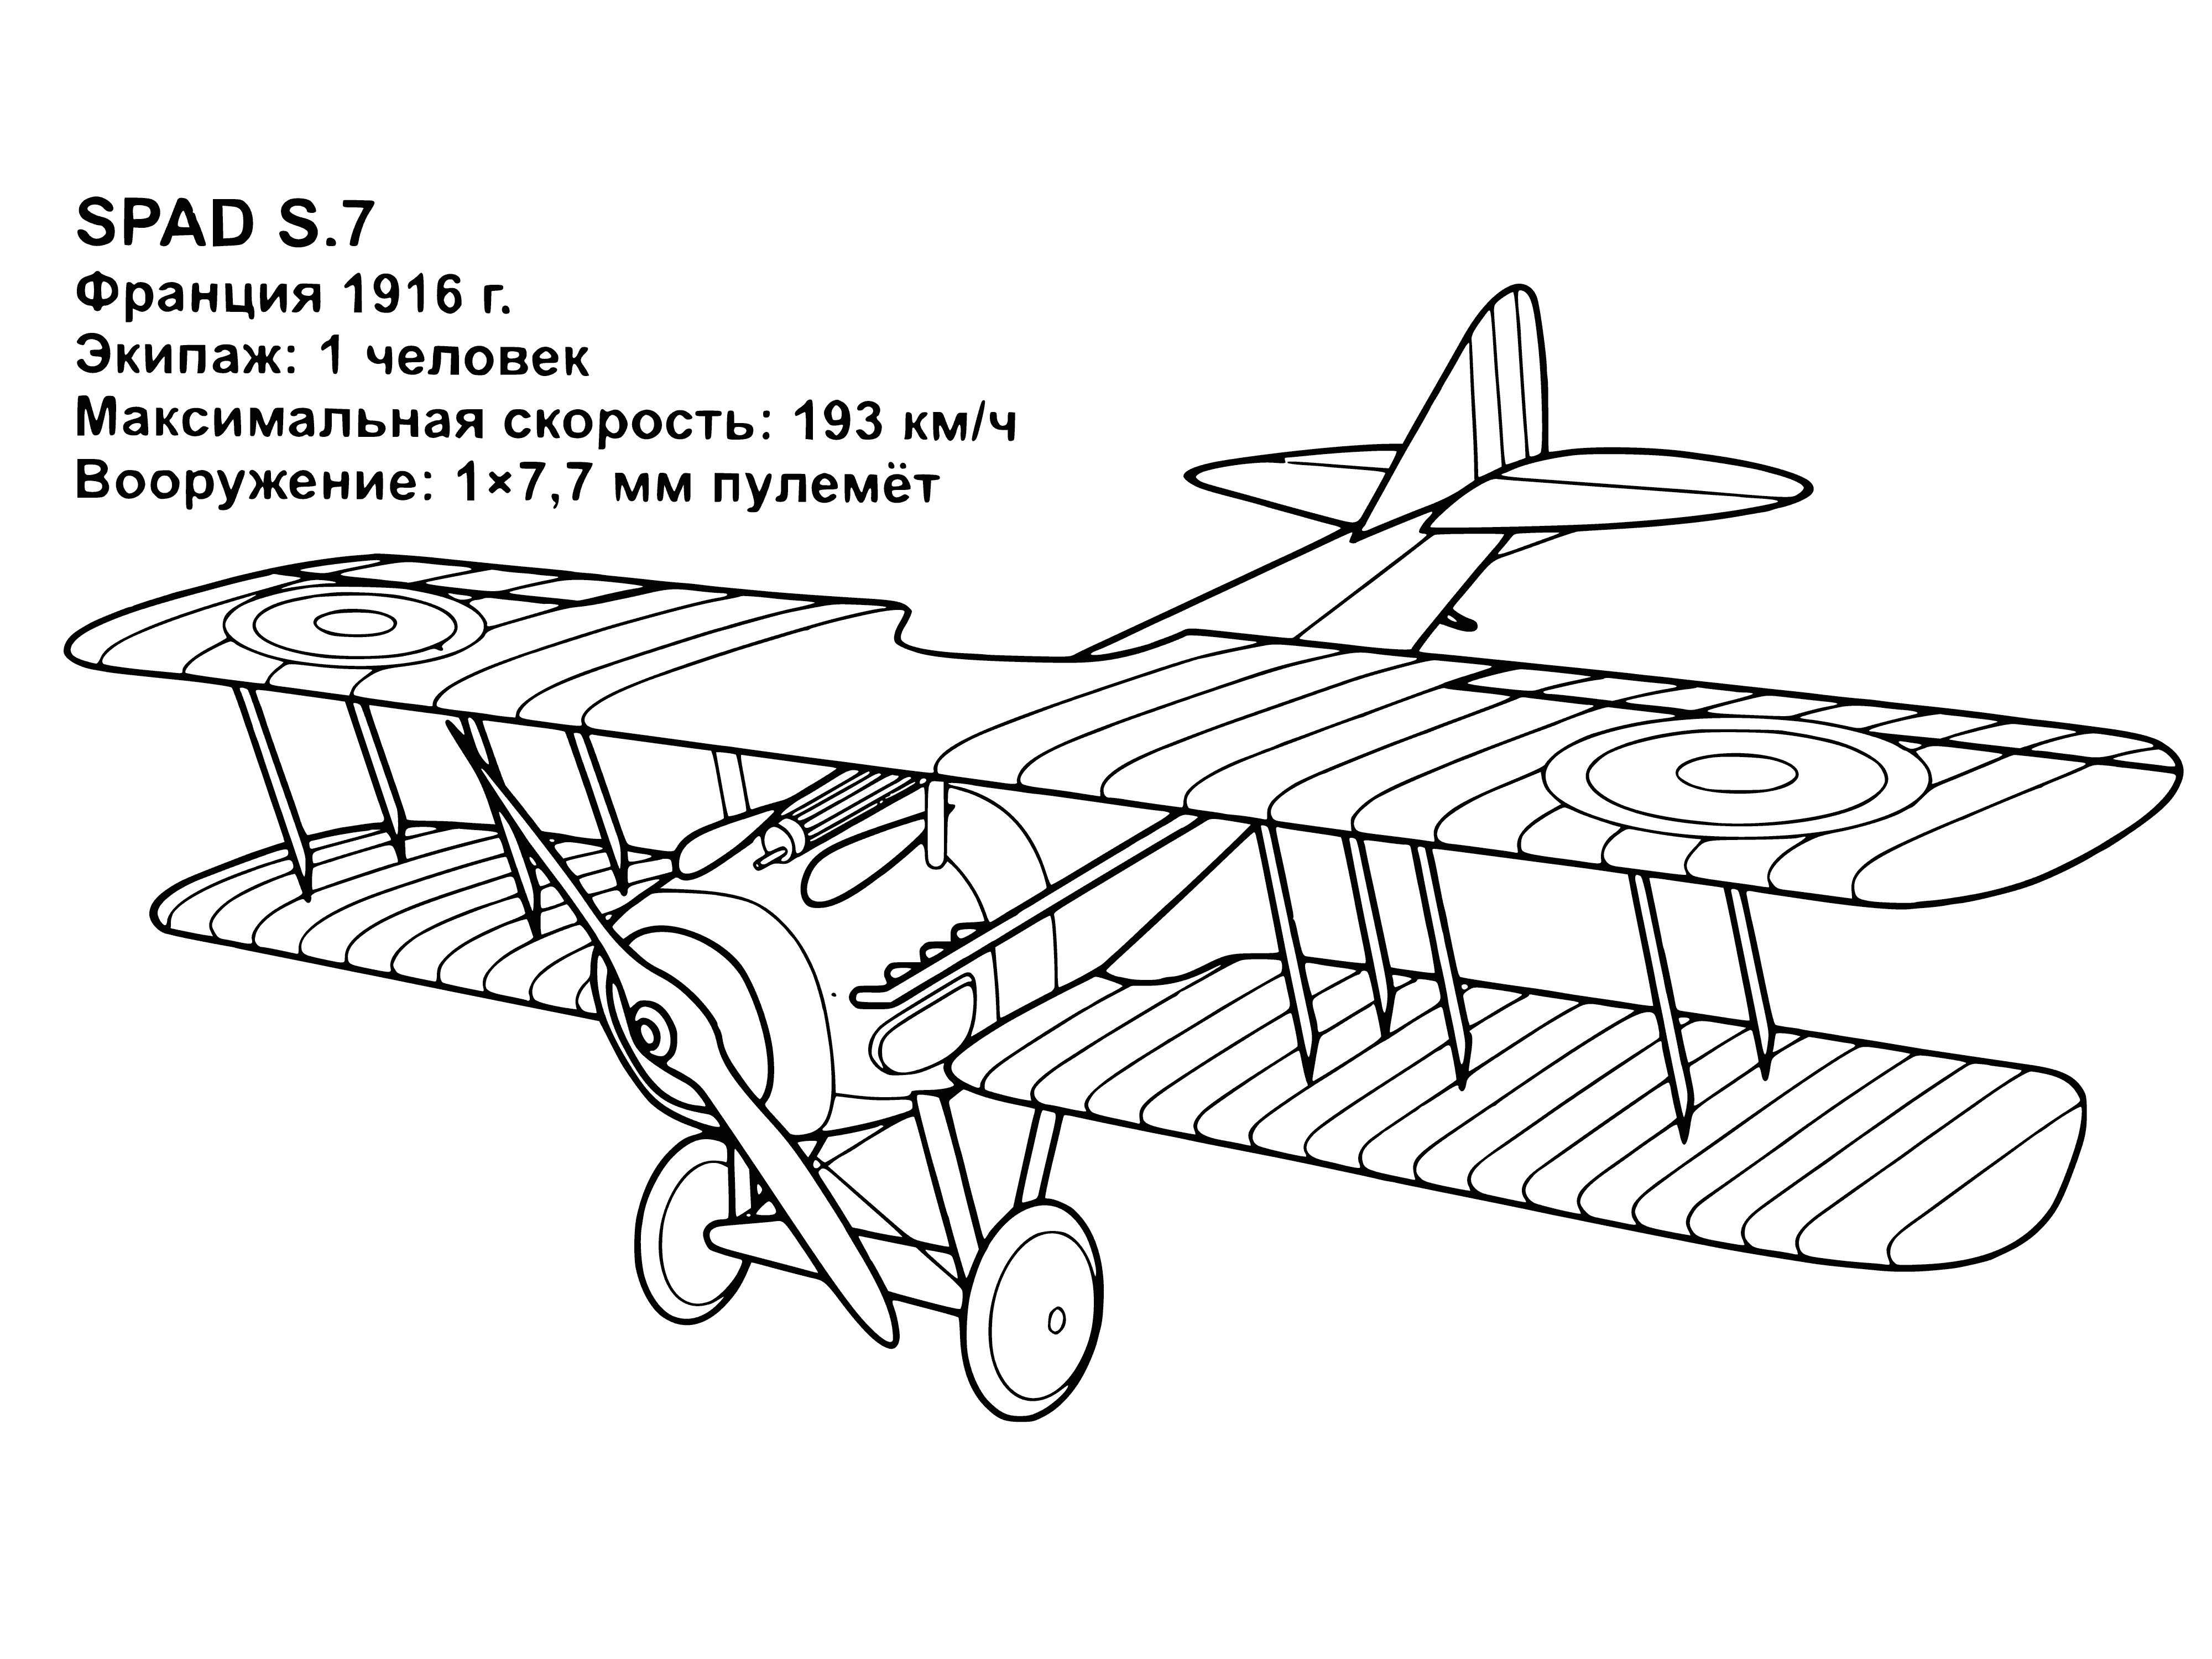 coloring page: Plane from 1916 with two sets of wings, two propellers, and a tail. Appears to be on a runway. #aviationhistory